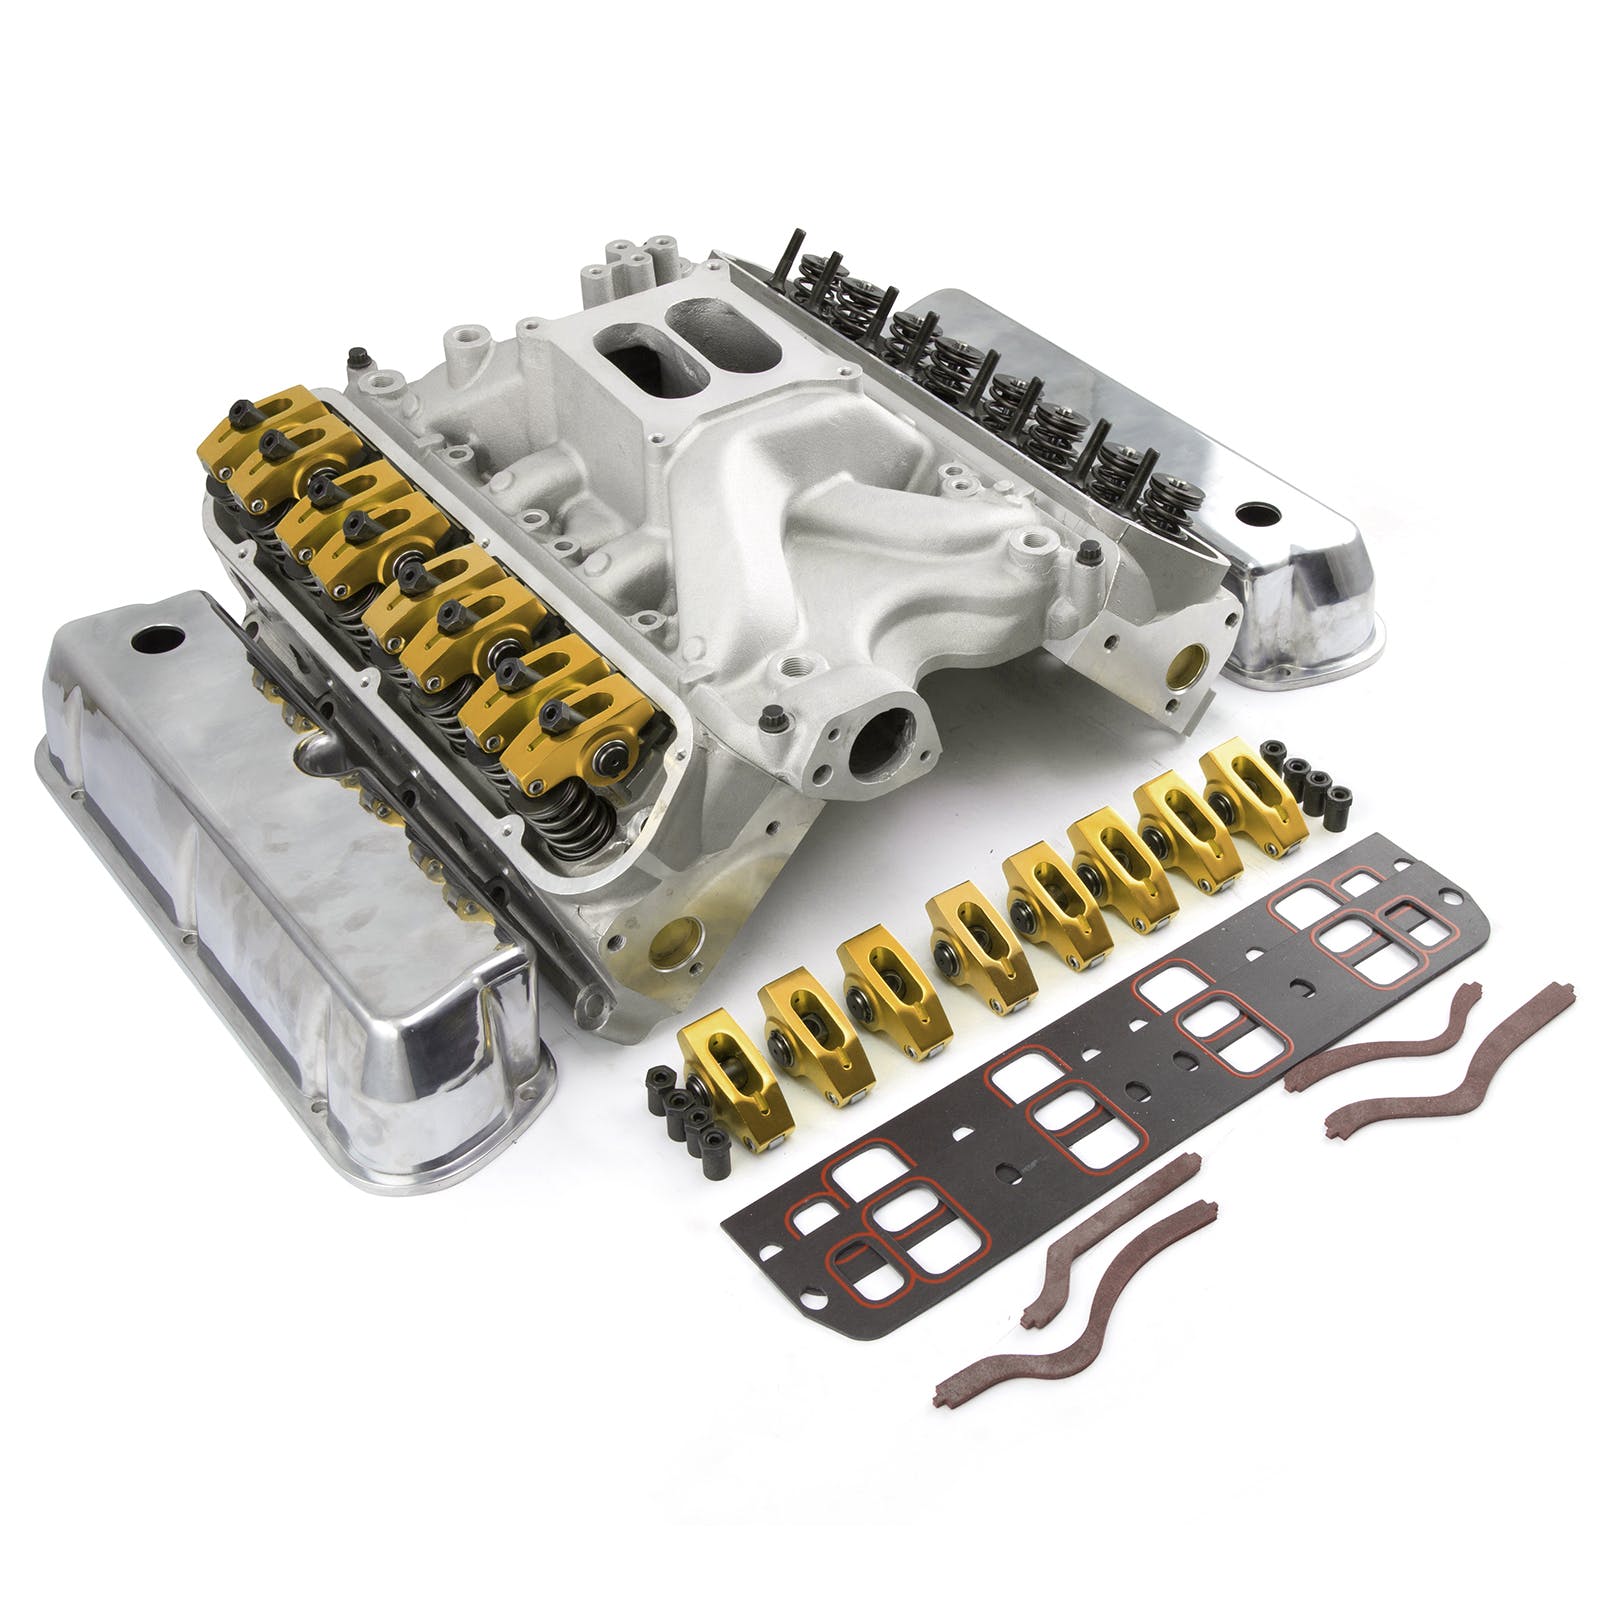 Speedmaster PCE435.1031 Hyd FT 190cc Cylinder Head Top End Engine Combo Kit